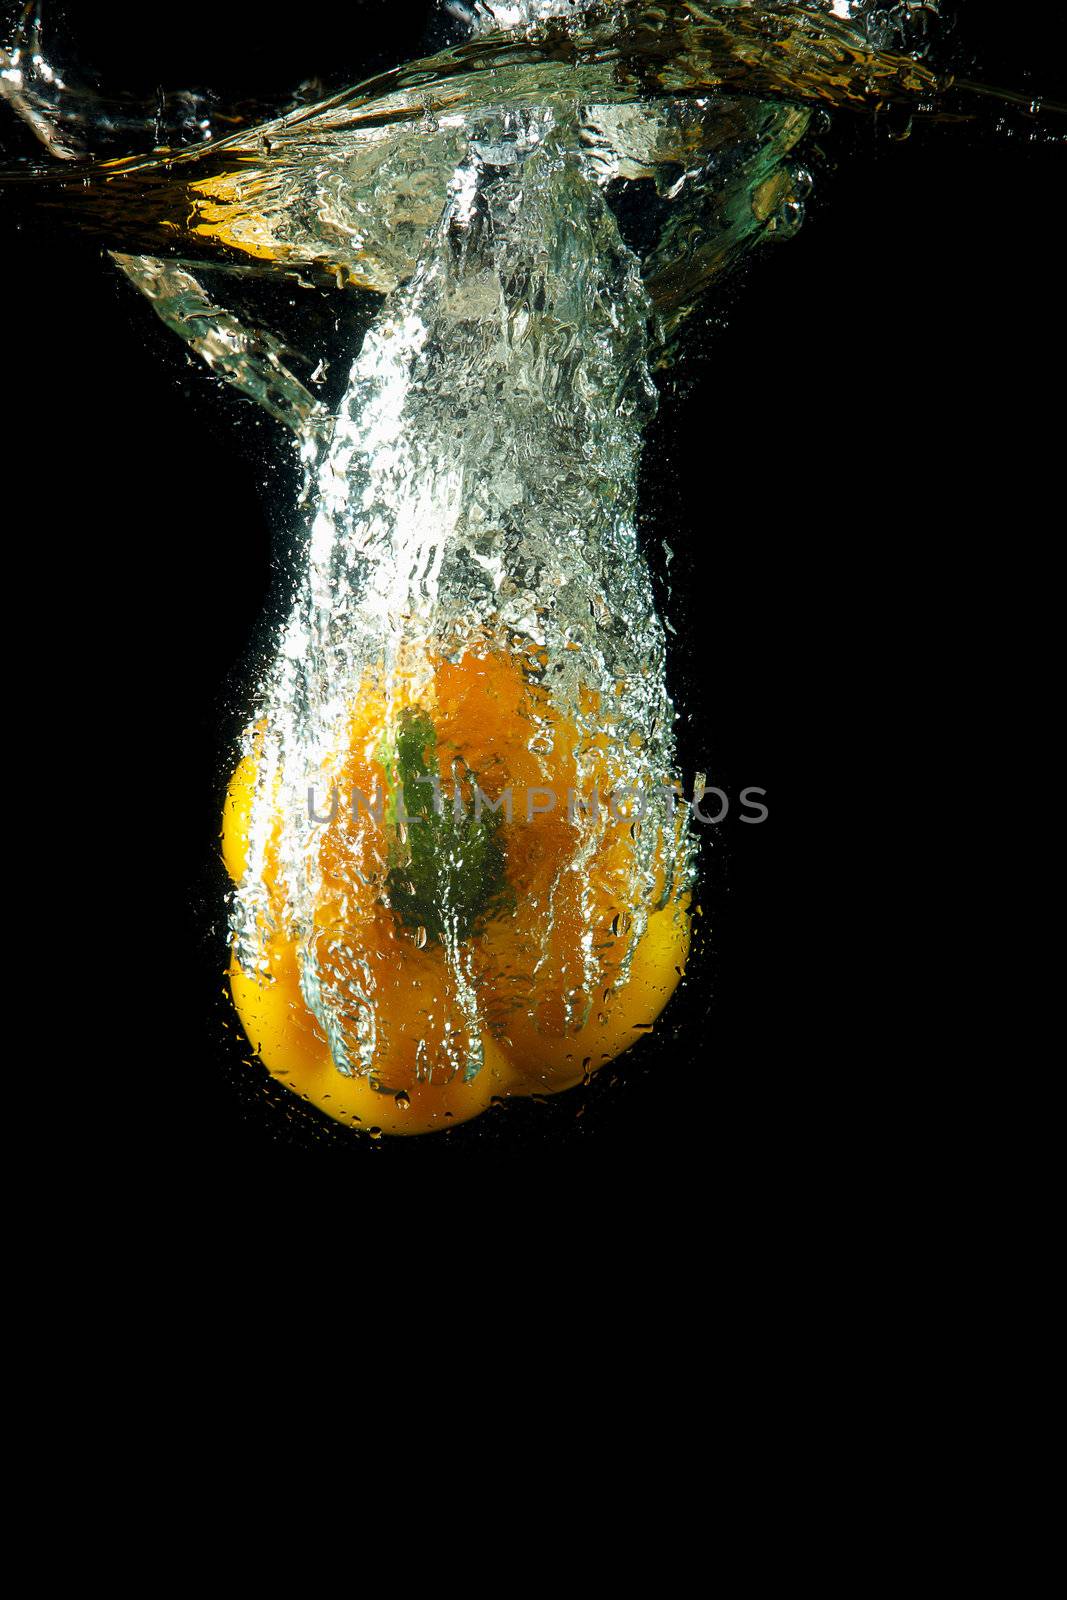 sweet yellow pepper by sergey_nivens